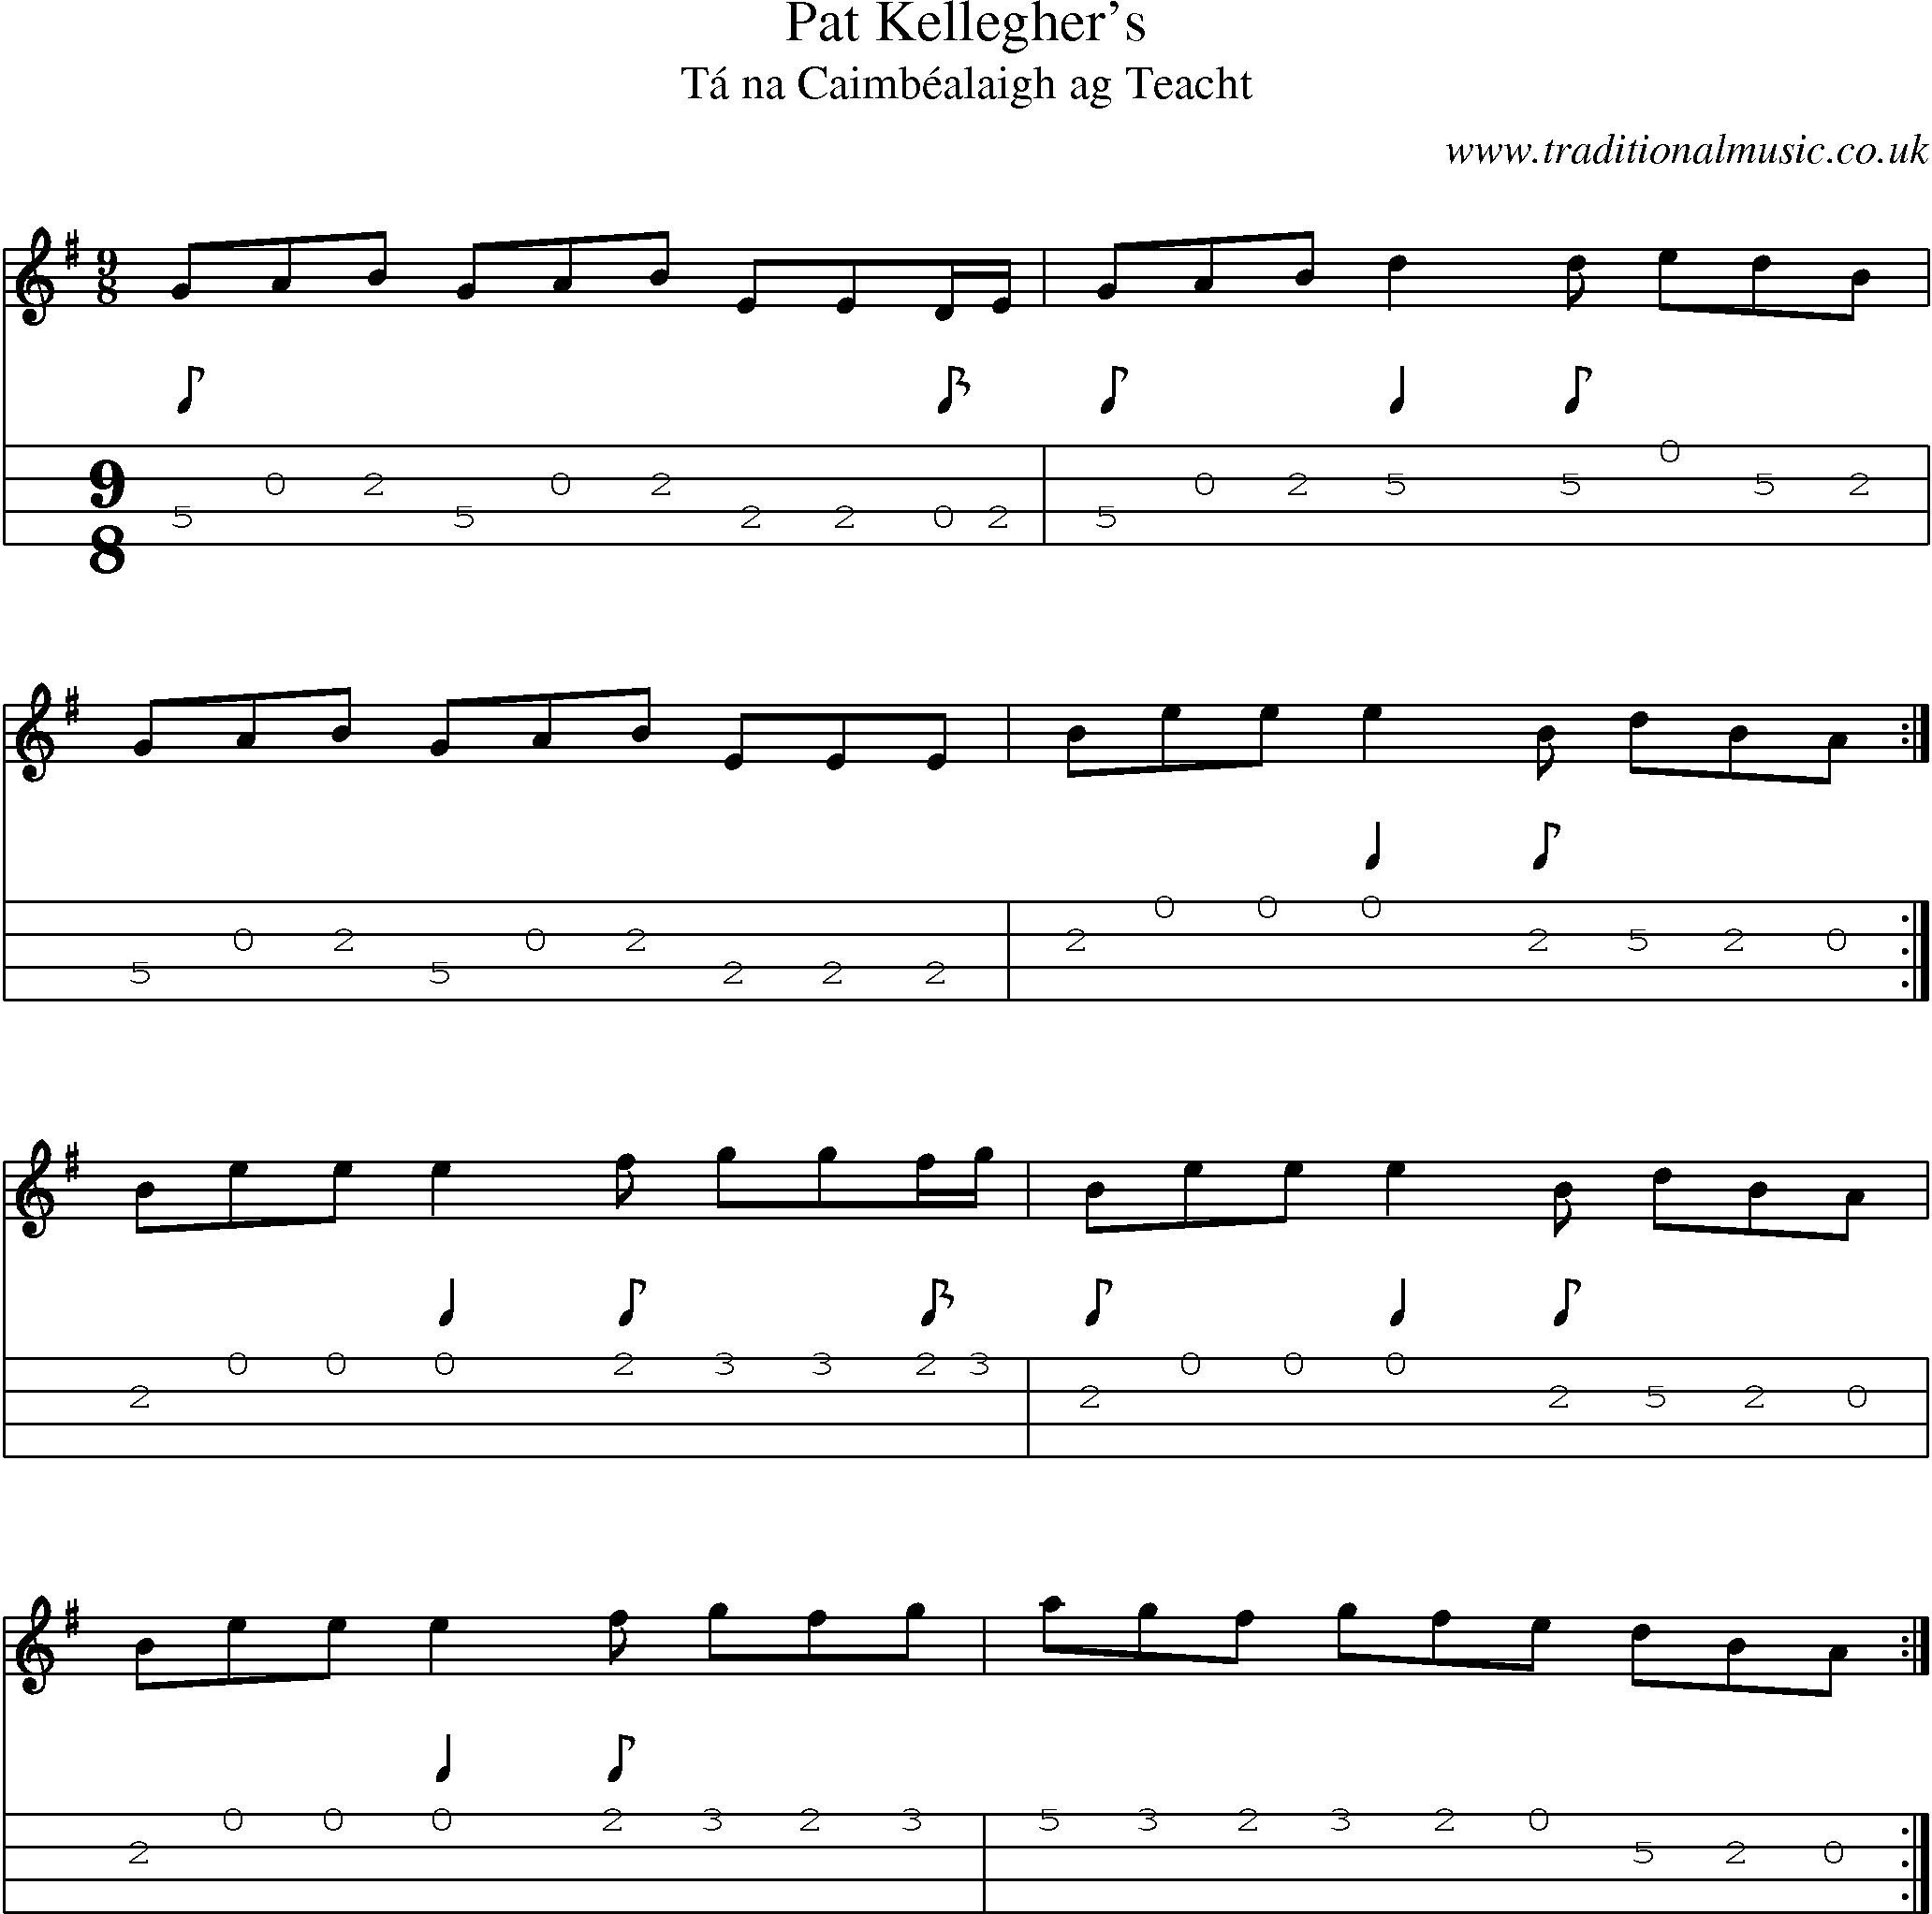 Music Score and Mandolin Tabs for Pat Kelleghers